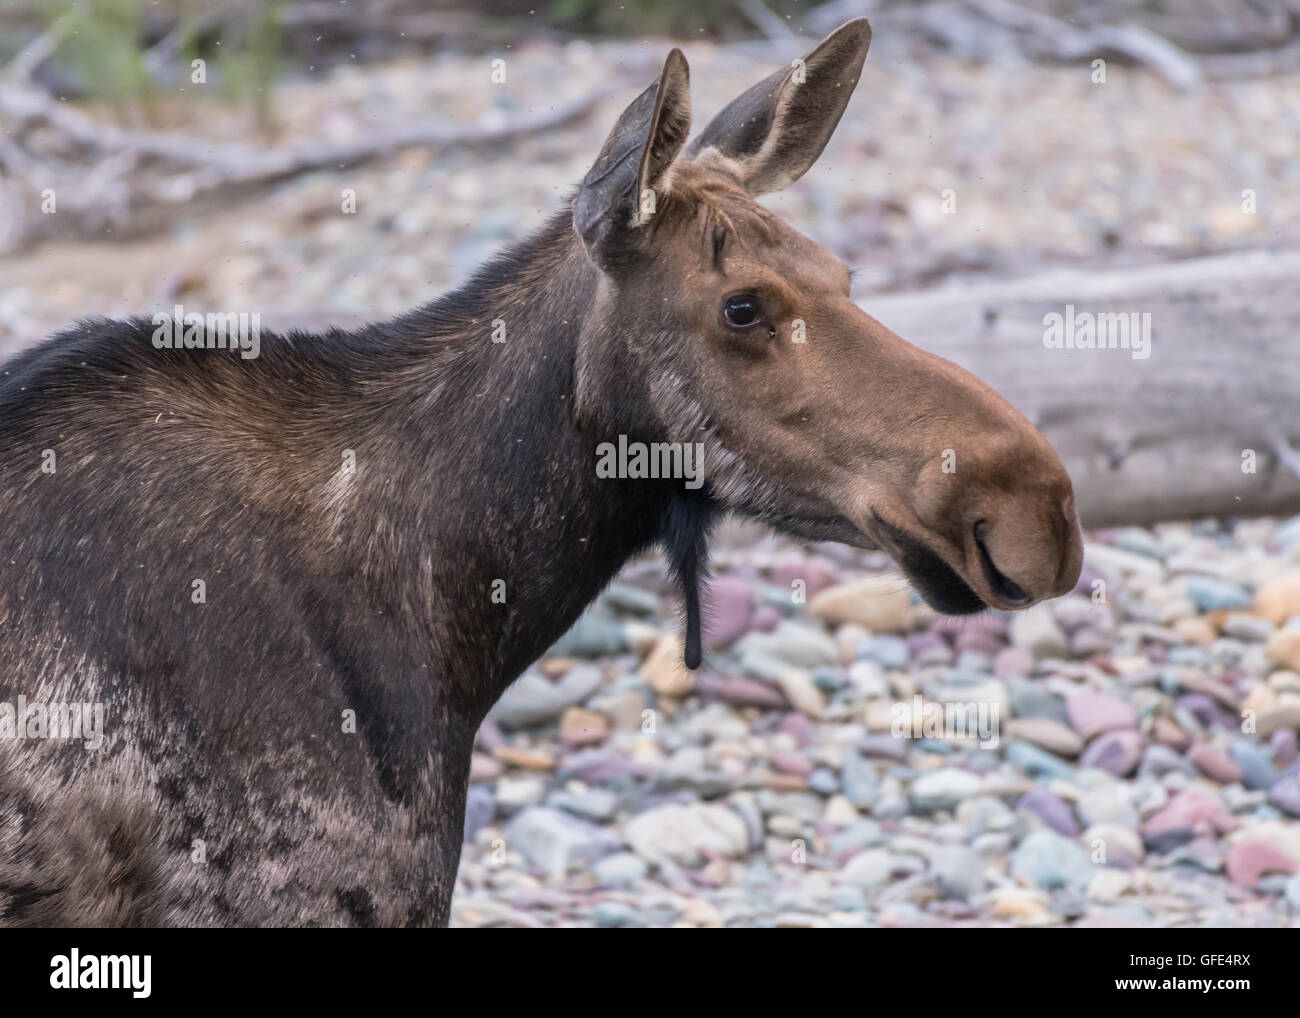 Moose Looks Right with Attentive Ears in a swarm of small insects Stock Photo